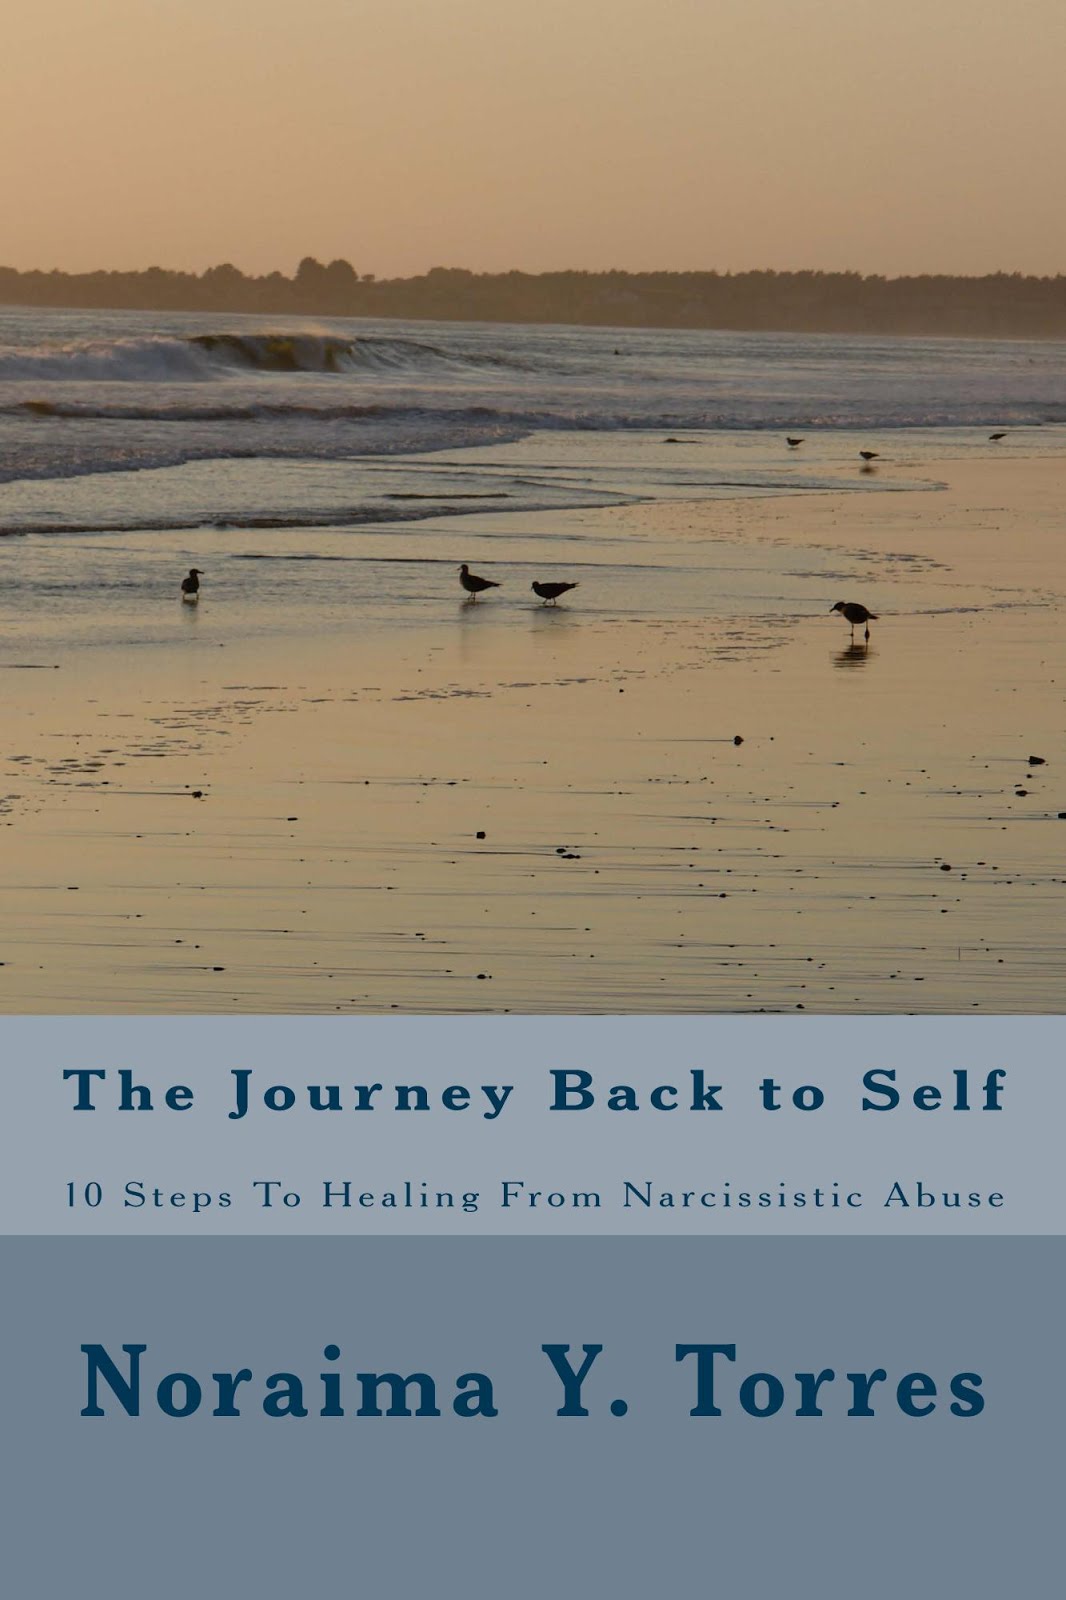 THE JOURNEY BACK TO SELF 10 STEPS TO HEALING AFTER NARCISSISTIC ABUSE